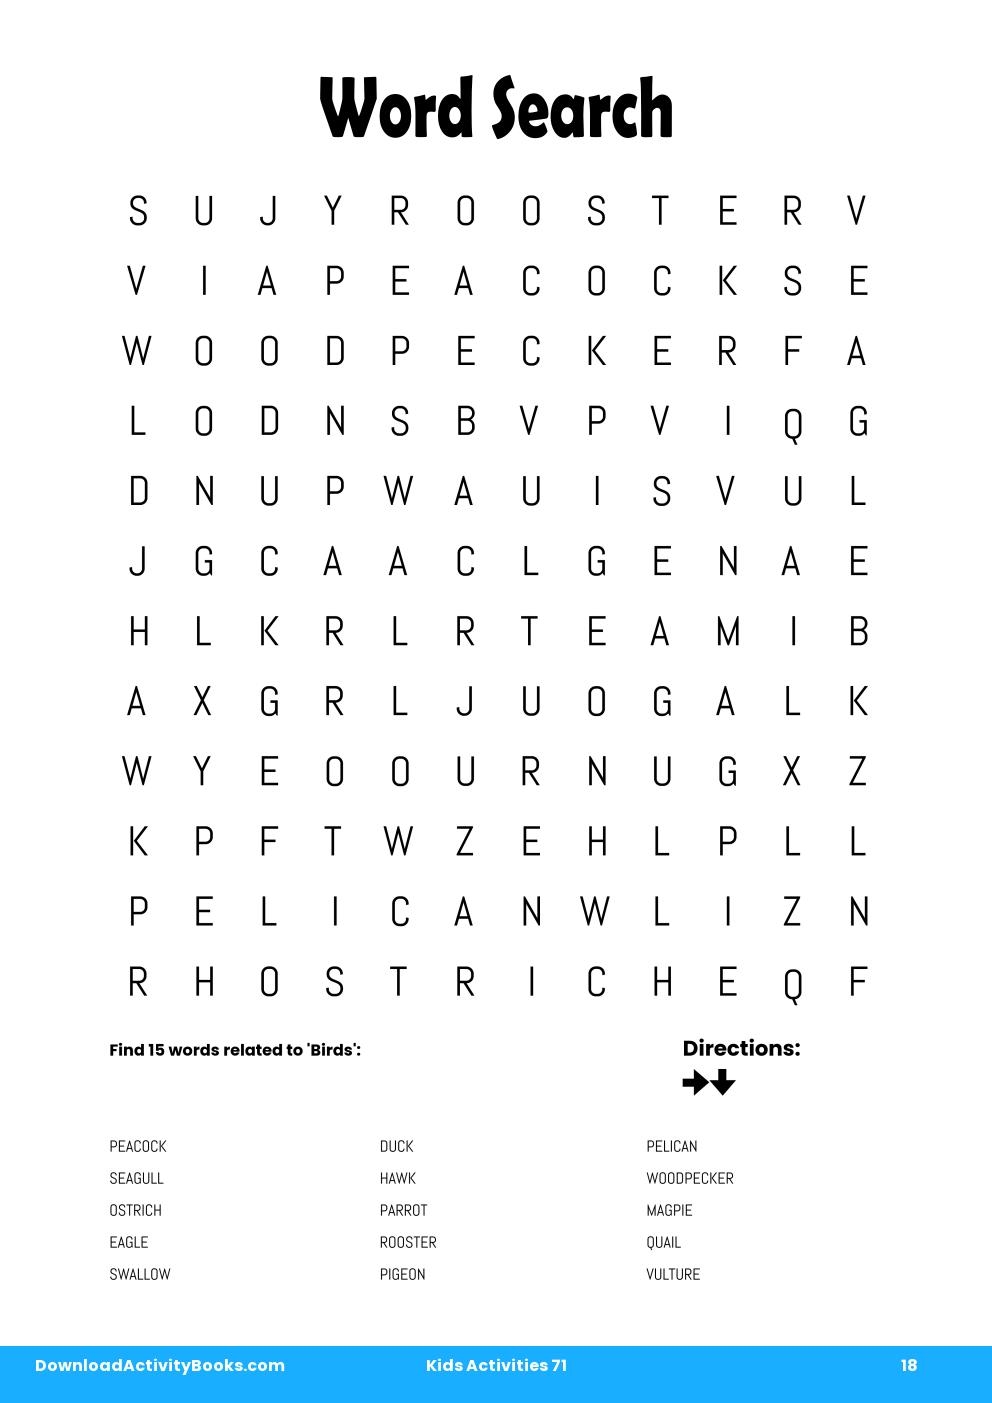 Word Search in Kids Activities 71